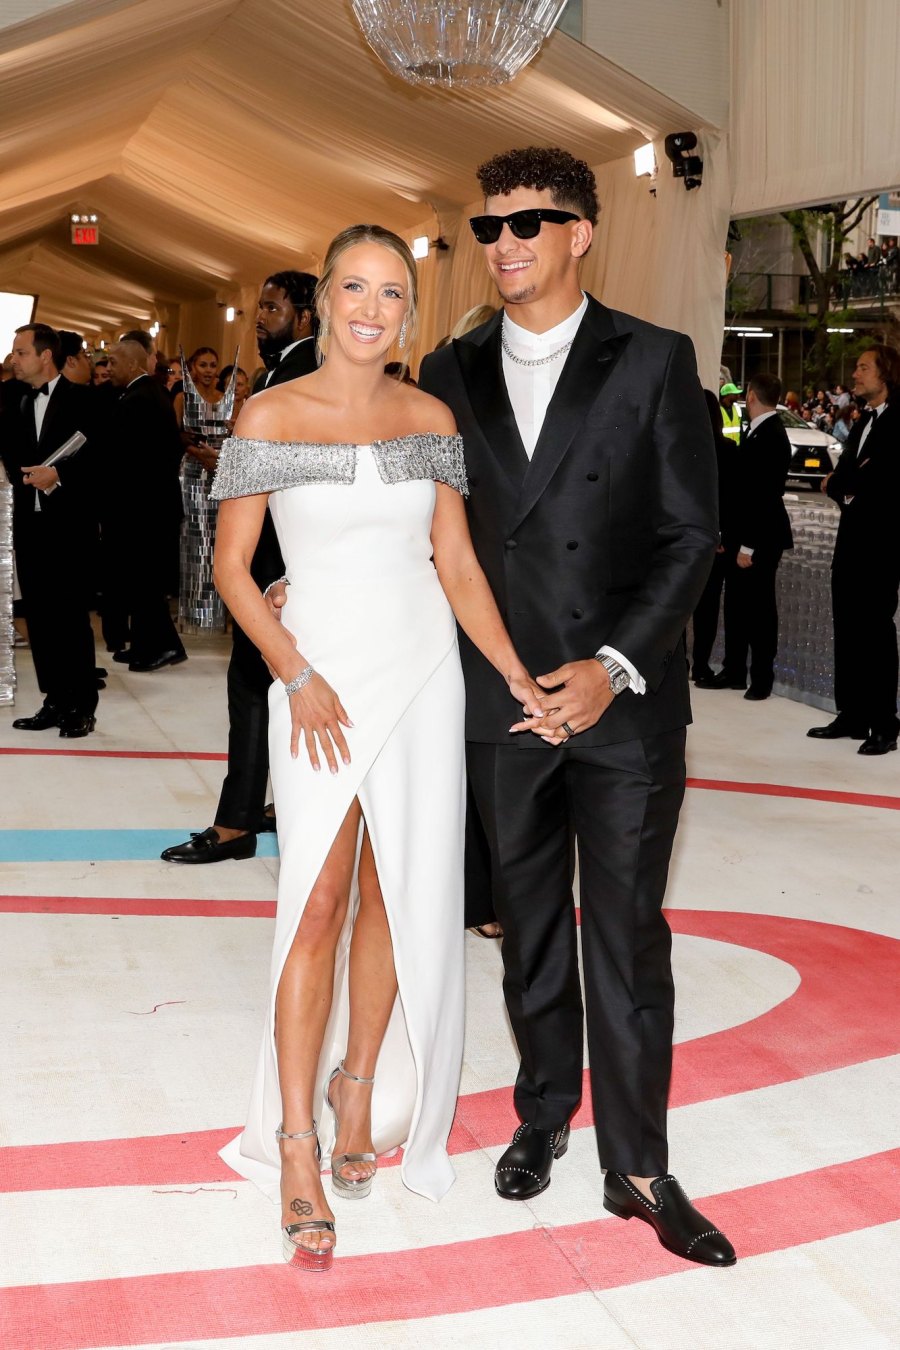 Patrick Mahomes and Wife Brittany Matthews Attend 1st Met Gala 3 Months After Super Bowl Victory